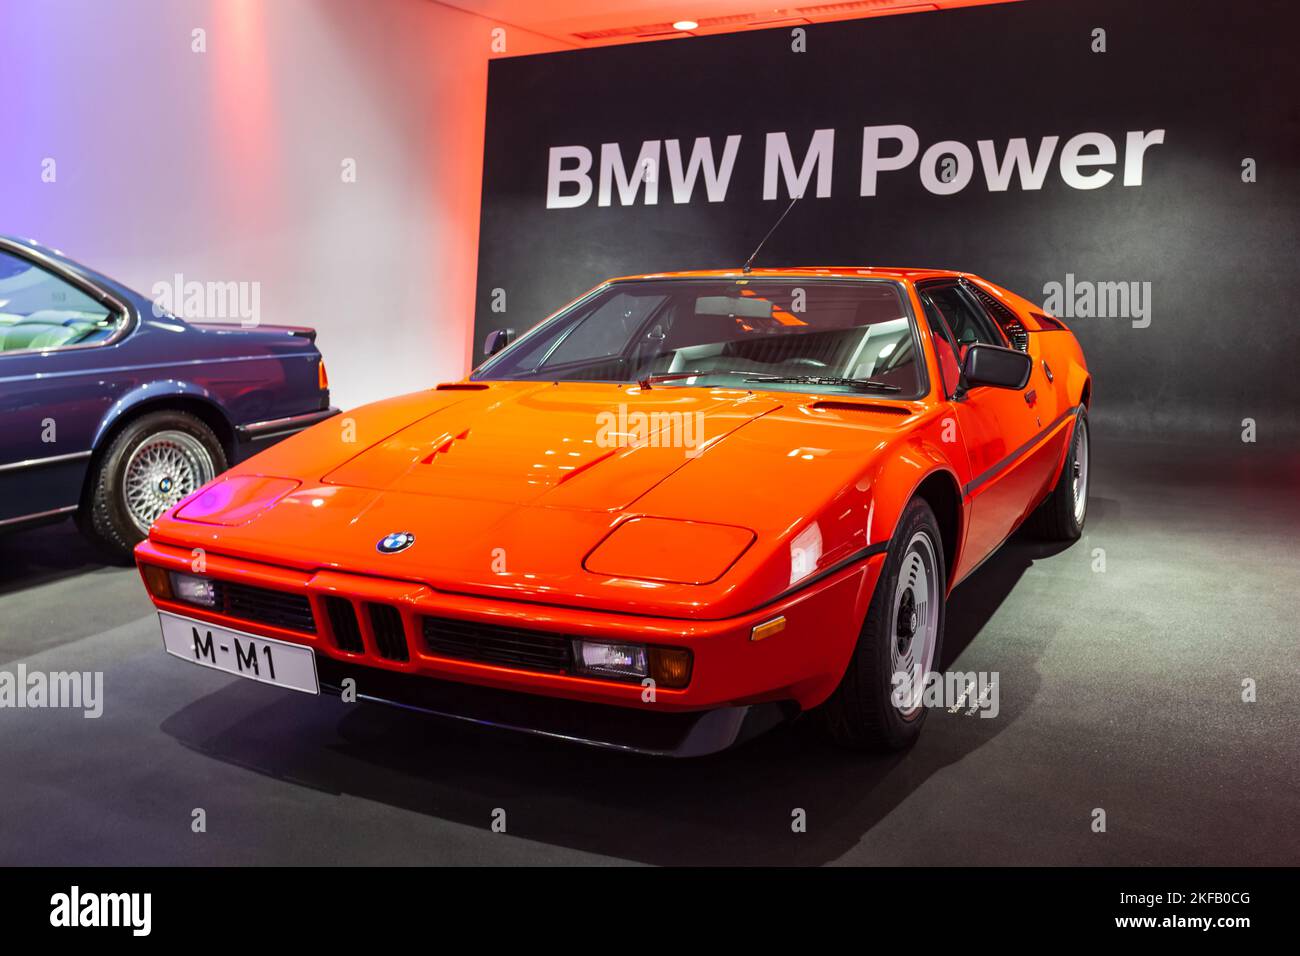 Munich, Germany - July 08, 2021: BMW M1 and M635CSi on display in BMW Museum, an automobile museum of BMW history located near the Olympiapark in Muni Stock Photo